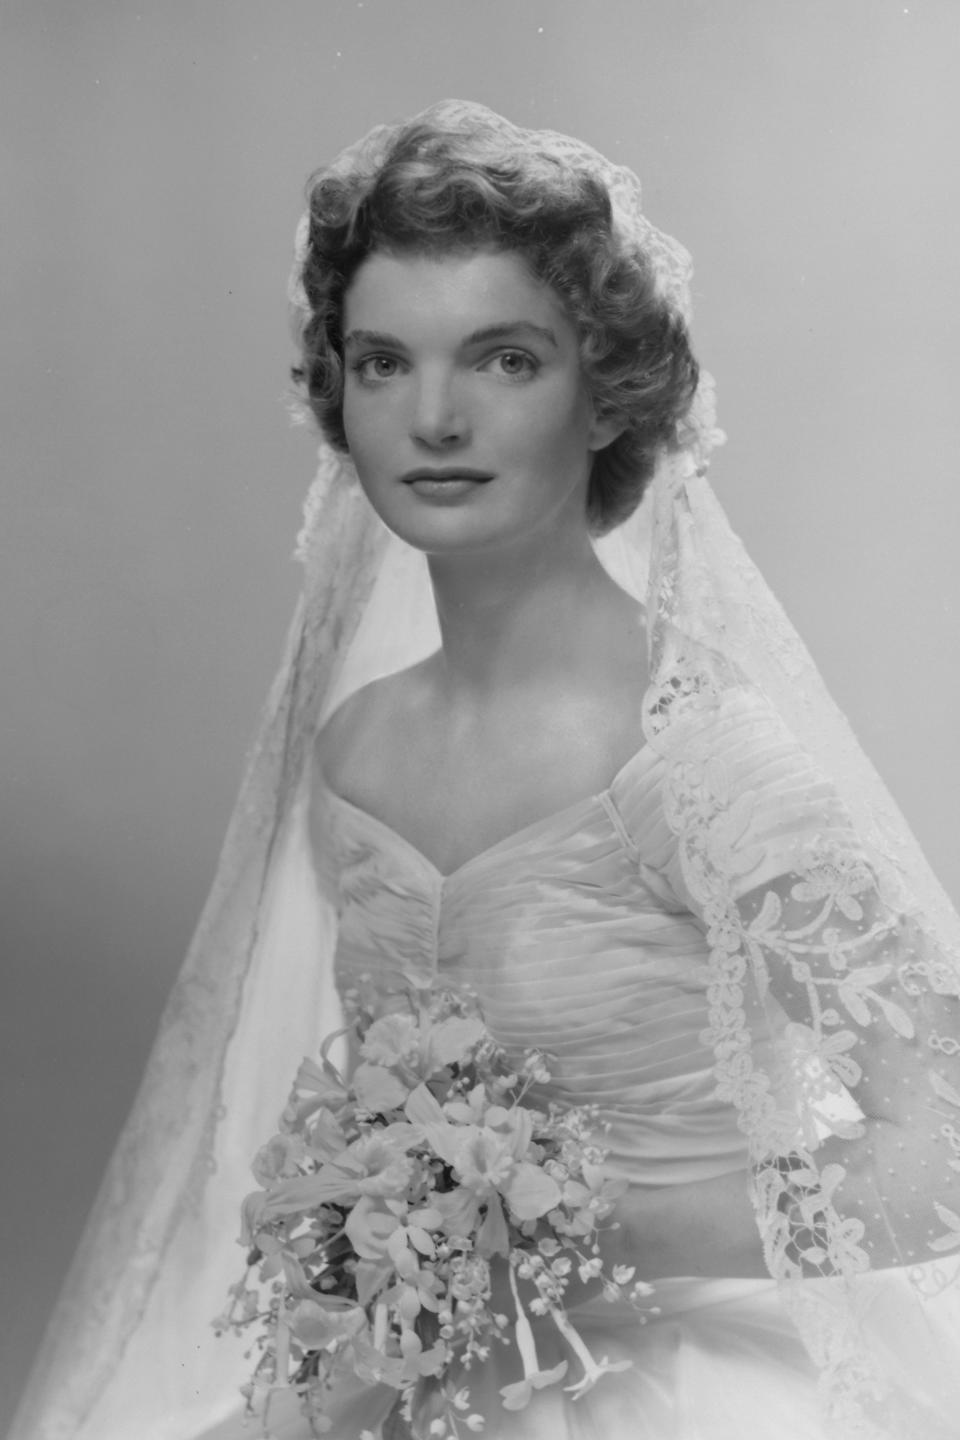 Bridal portrait of Jacqueline Lee Bouvier (1929 - 1994) shows her in an Anne Lowe-designed wedding dress, a bouquet of flowers in her hands, New York, New York, 1953. (Photo by Bachrach/Getty Images)